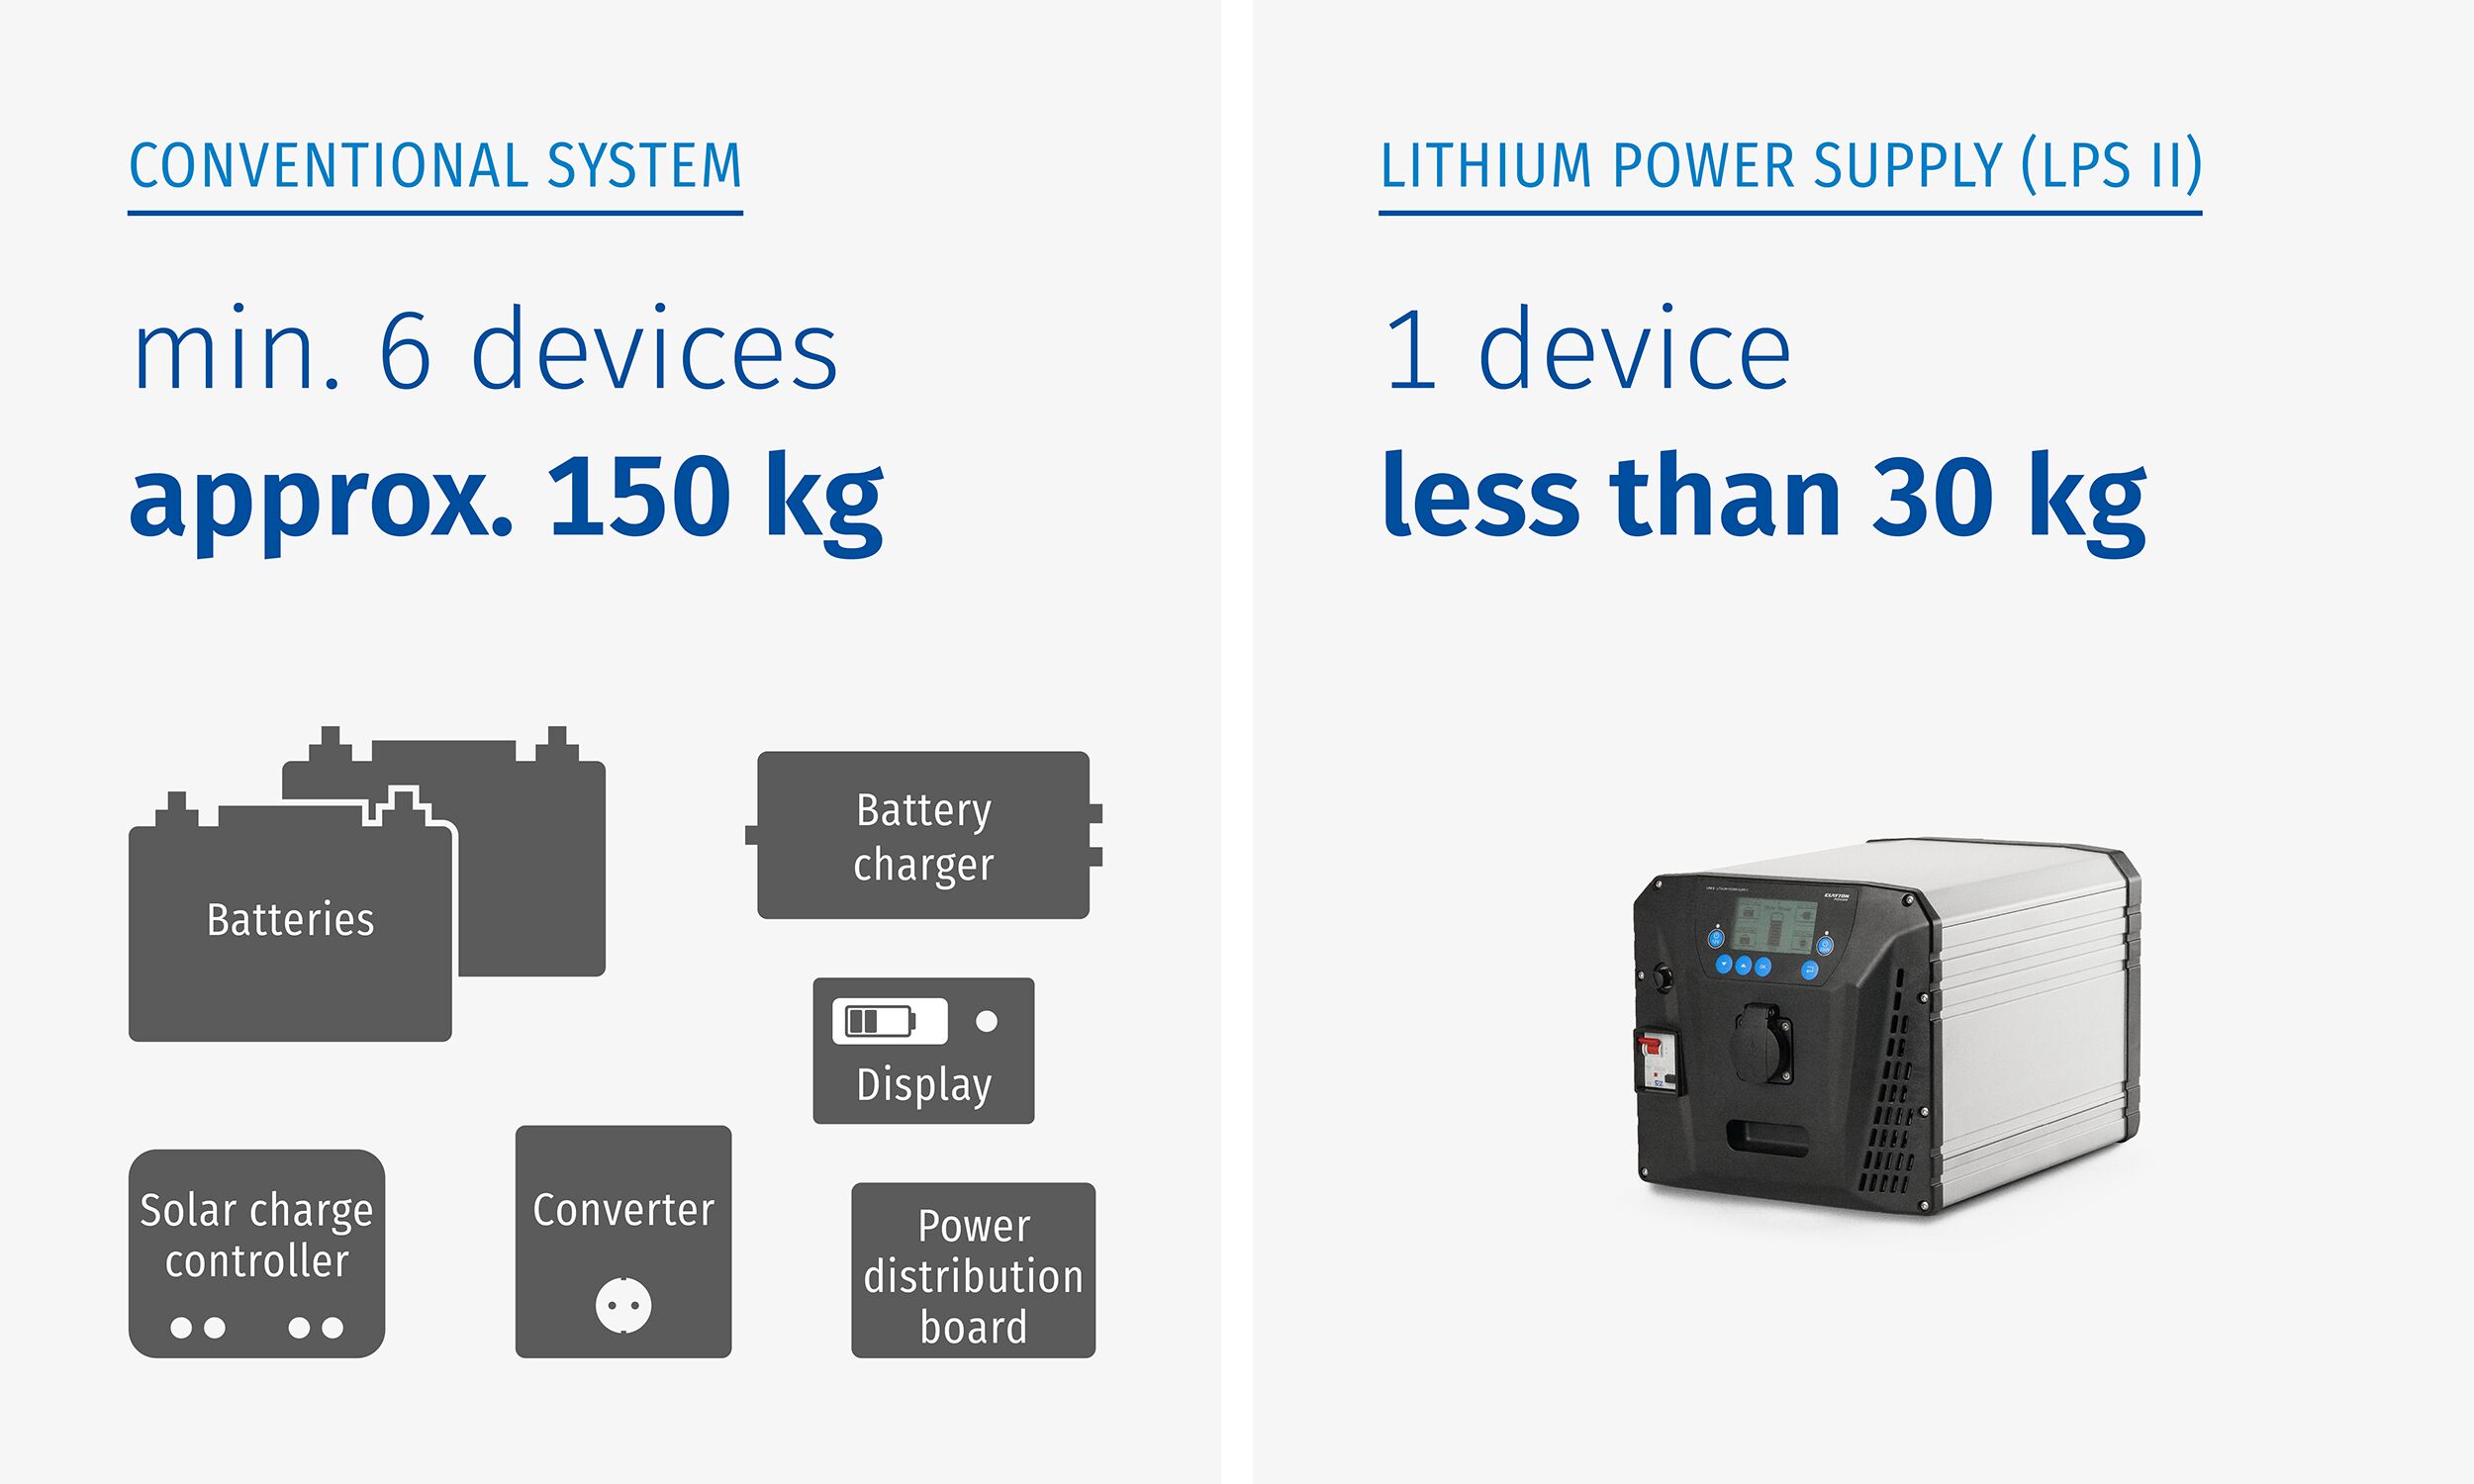 The LPS 2 in comparison with conventional systems